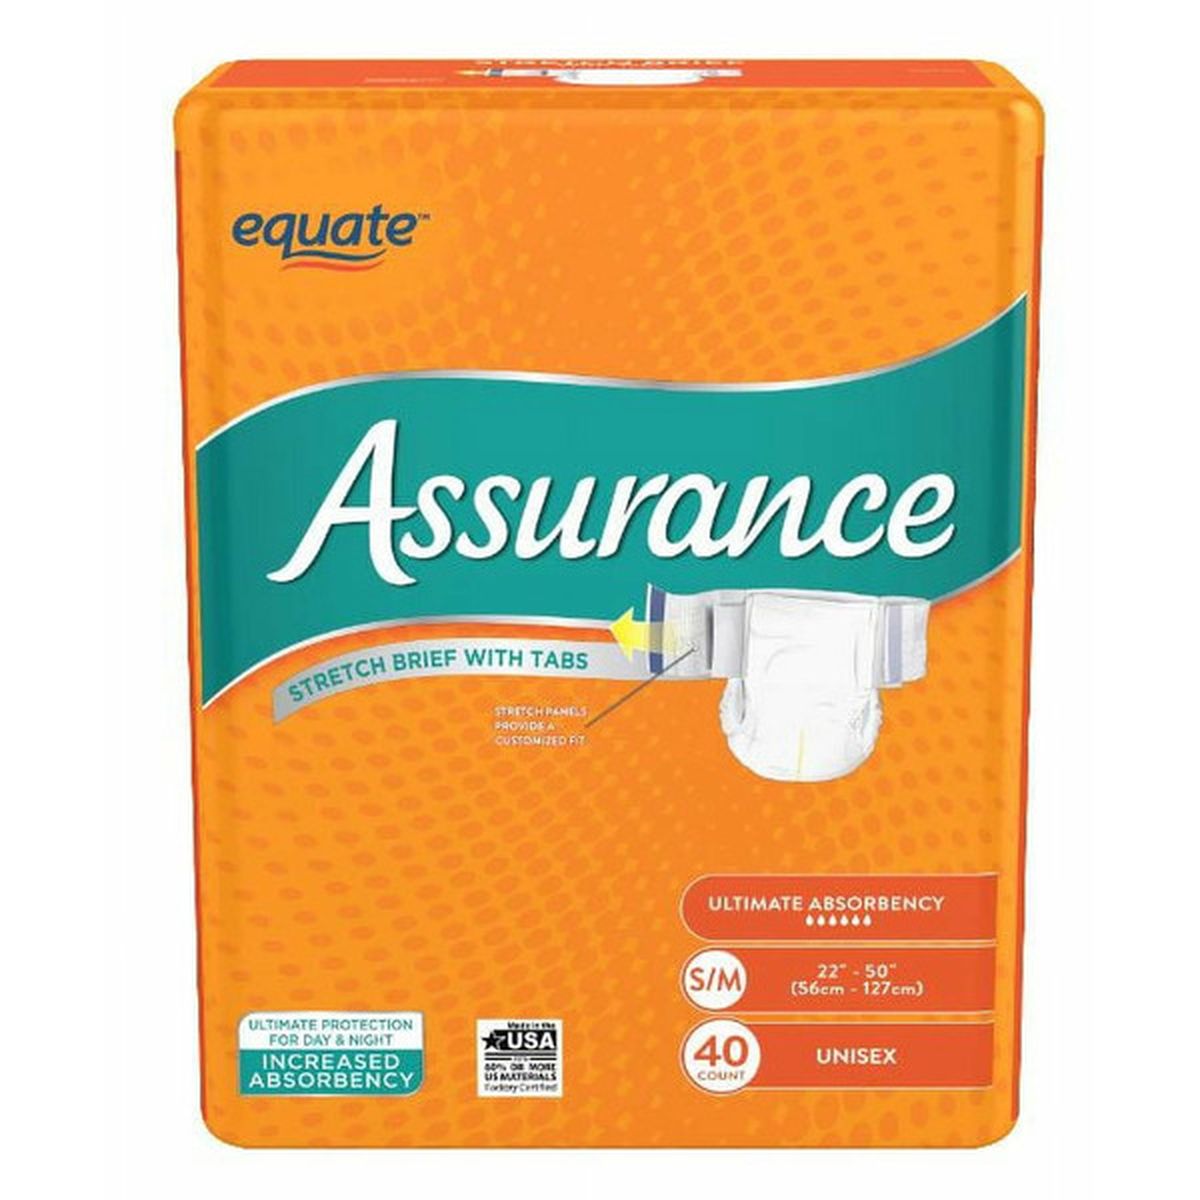 Equate Assurance Ultimate Absorbency Unisex Stretch Brief with Tabs, S/M,  40 count (40 ct) Delivery or Pickup Near Me - Instacart